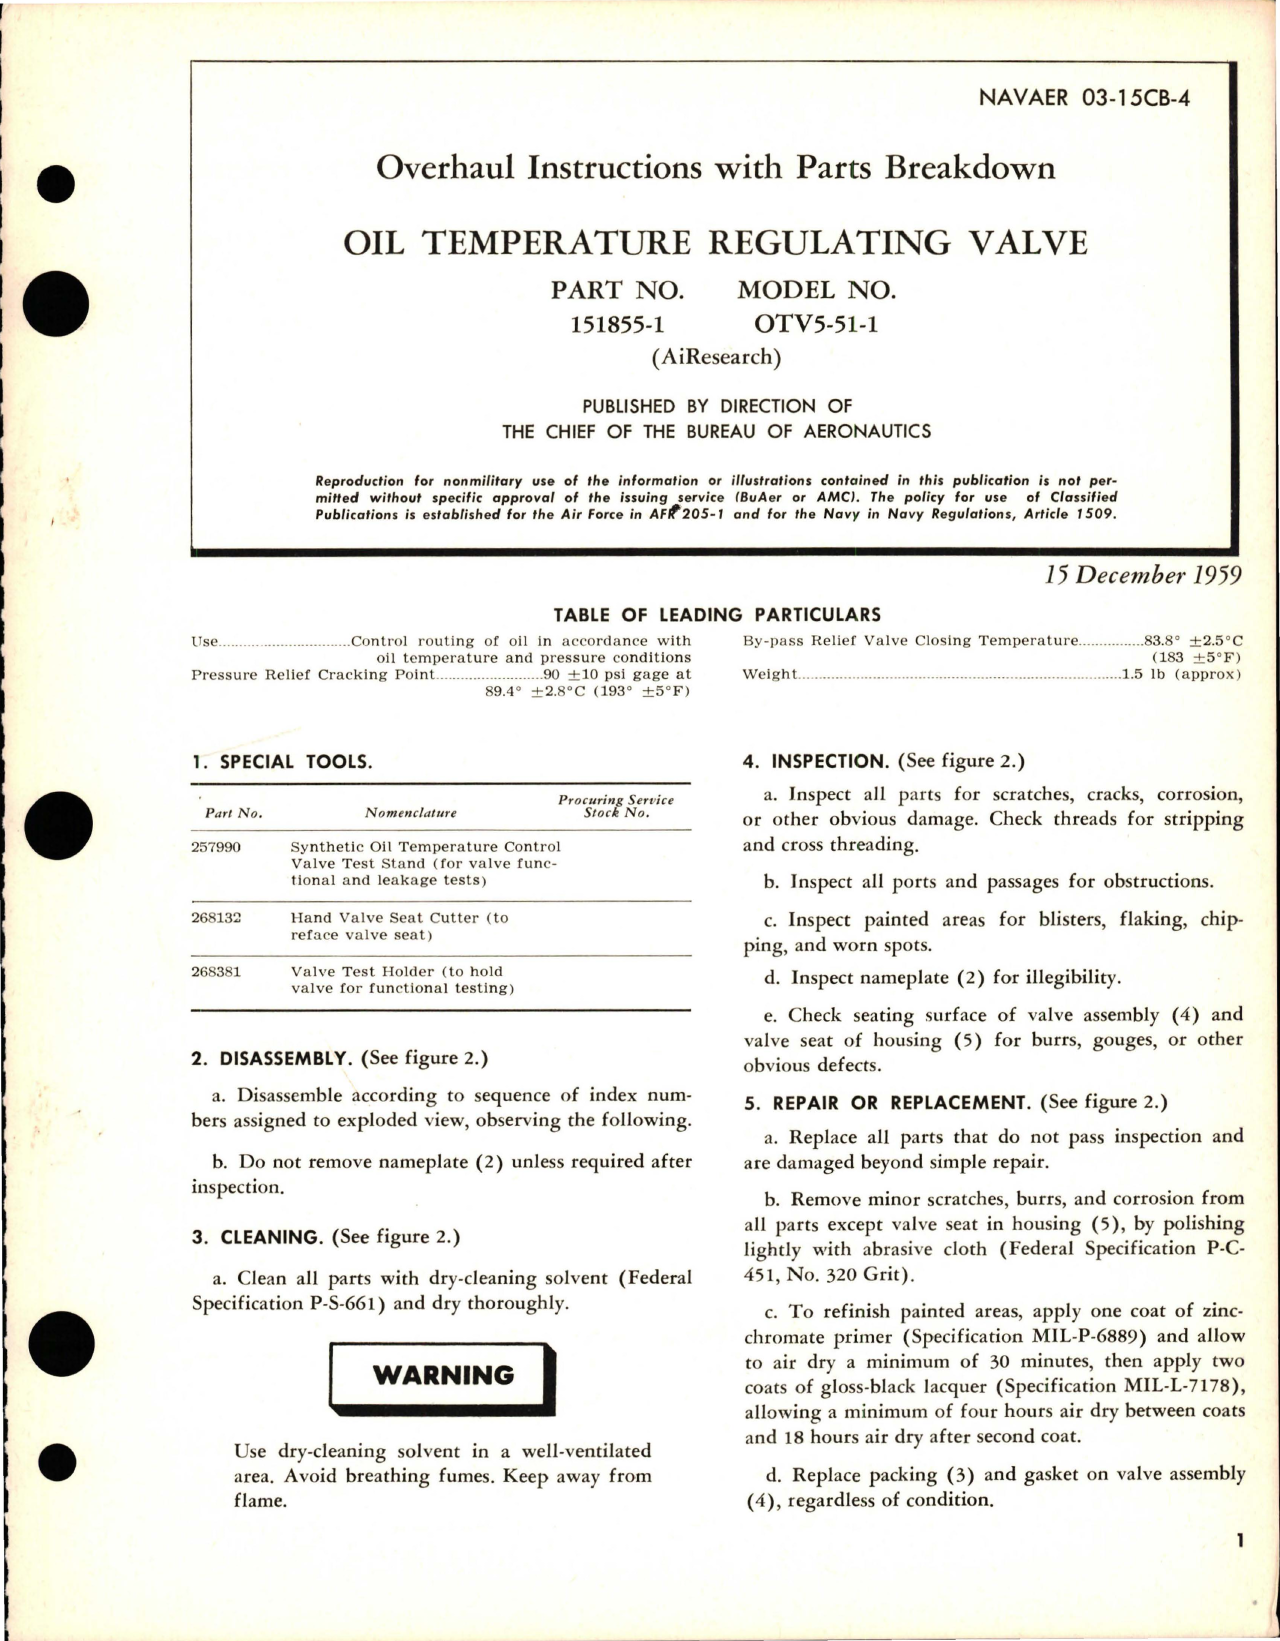 Sample page 1 from AirCorps Library document: Overhaul Instructions with Parts Breakdown for Oil Temperature Regulating Valve - Part 151855-1 - Model OTV5-51-1